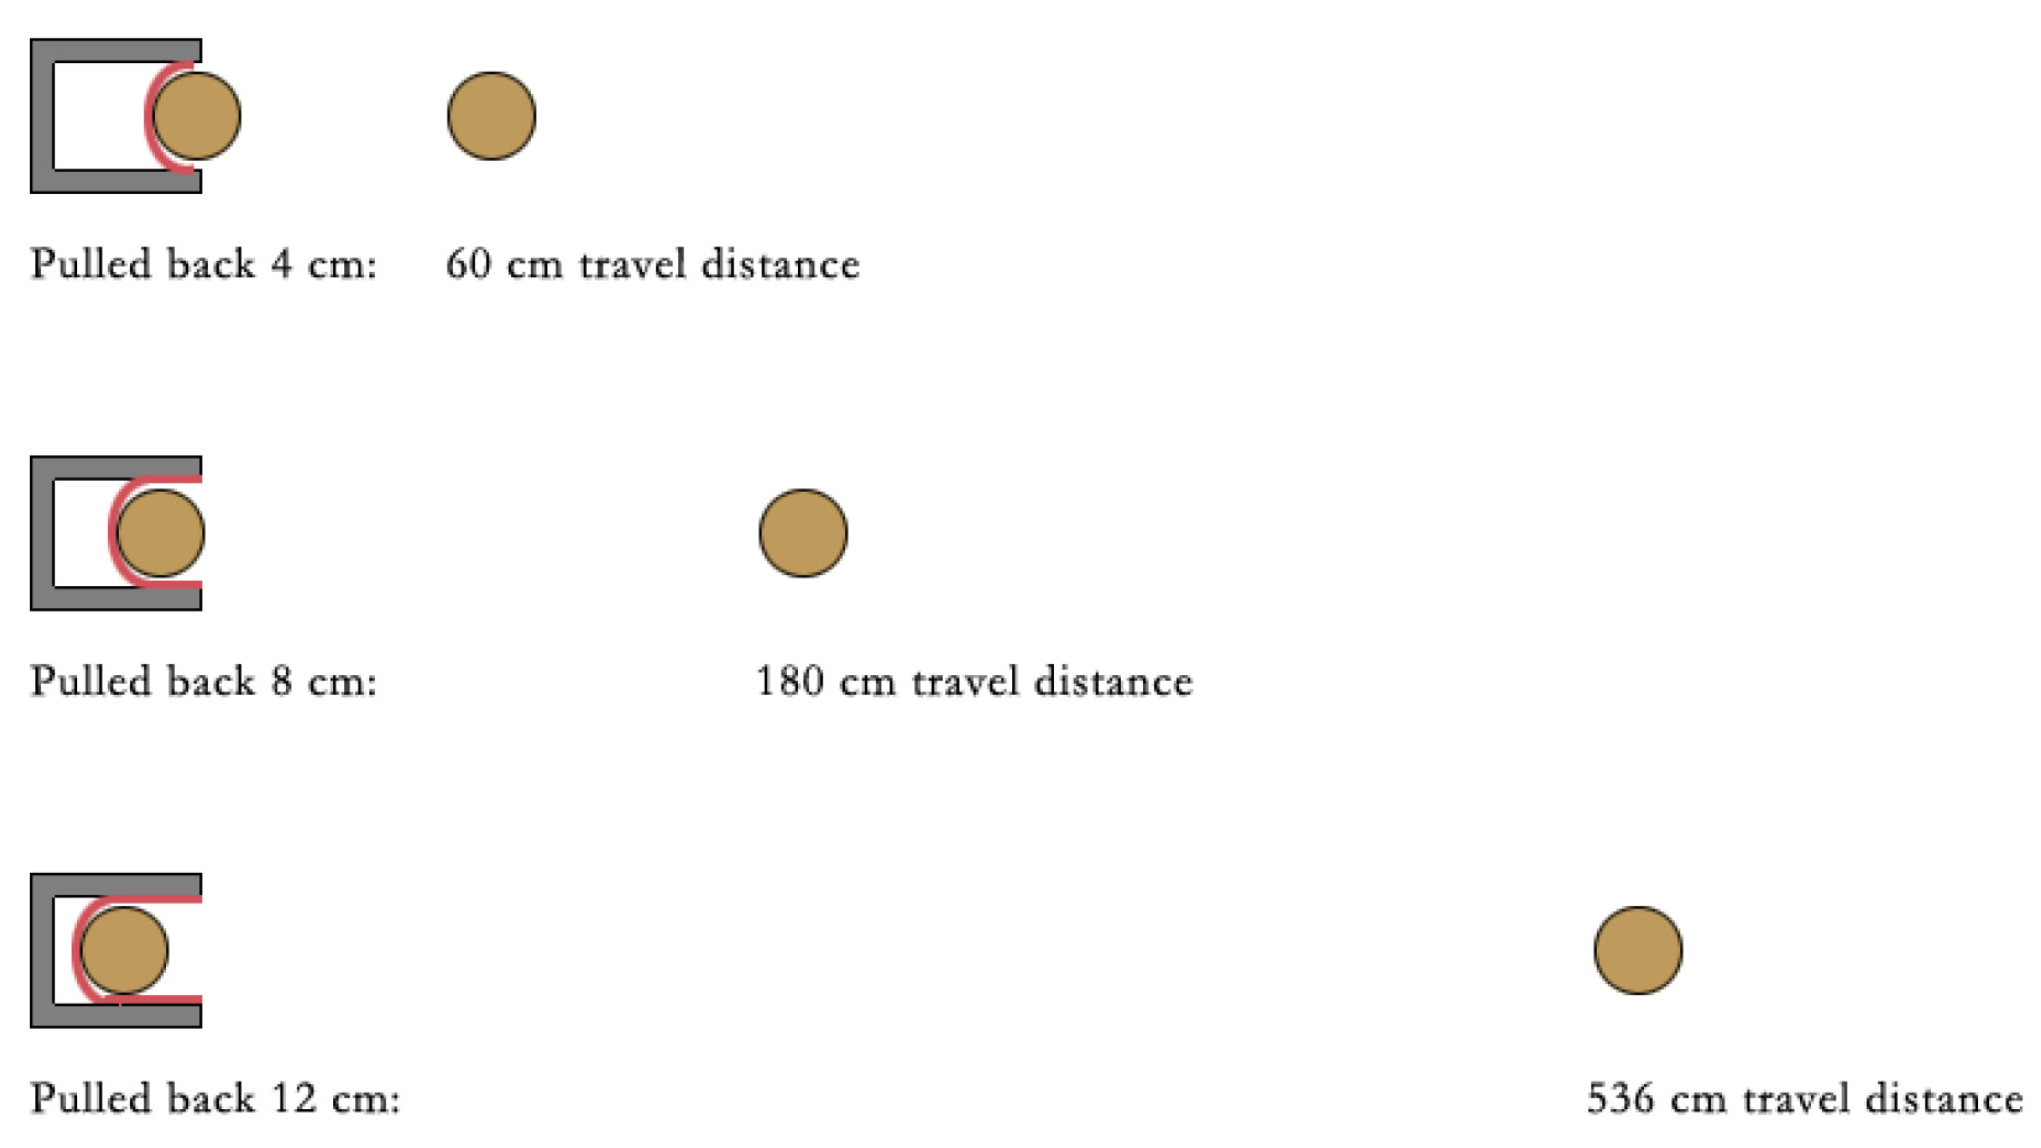 Figure 3 Drawings of disk for different distances pulled back.